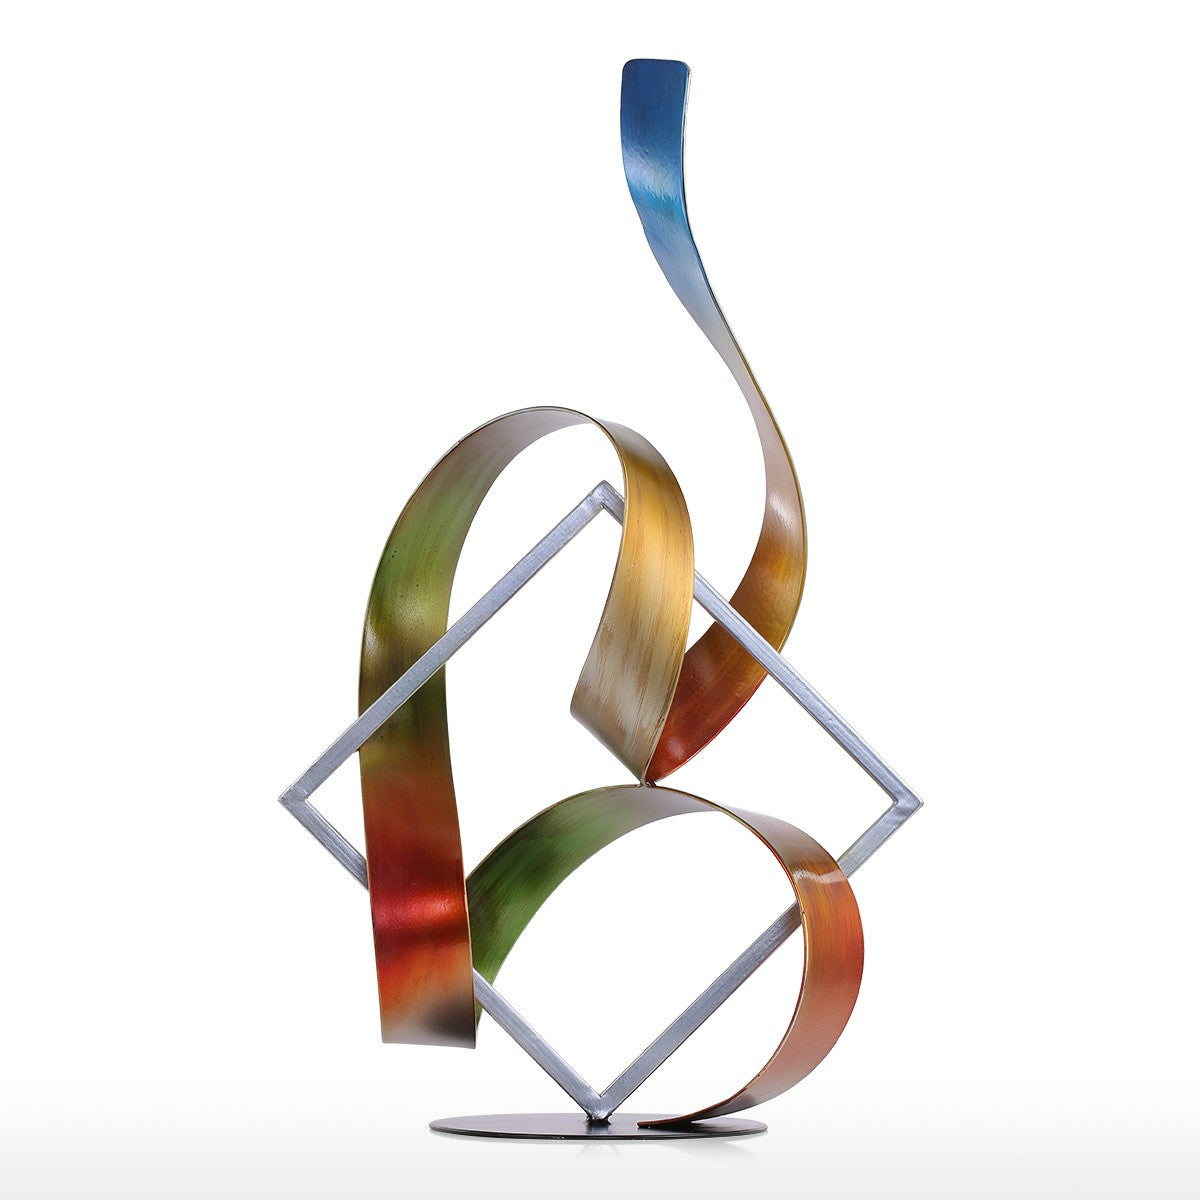 Metal Sculpture and Abstract Art with Metal Sculpture for Christmas Decorations and Home Decor